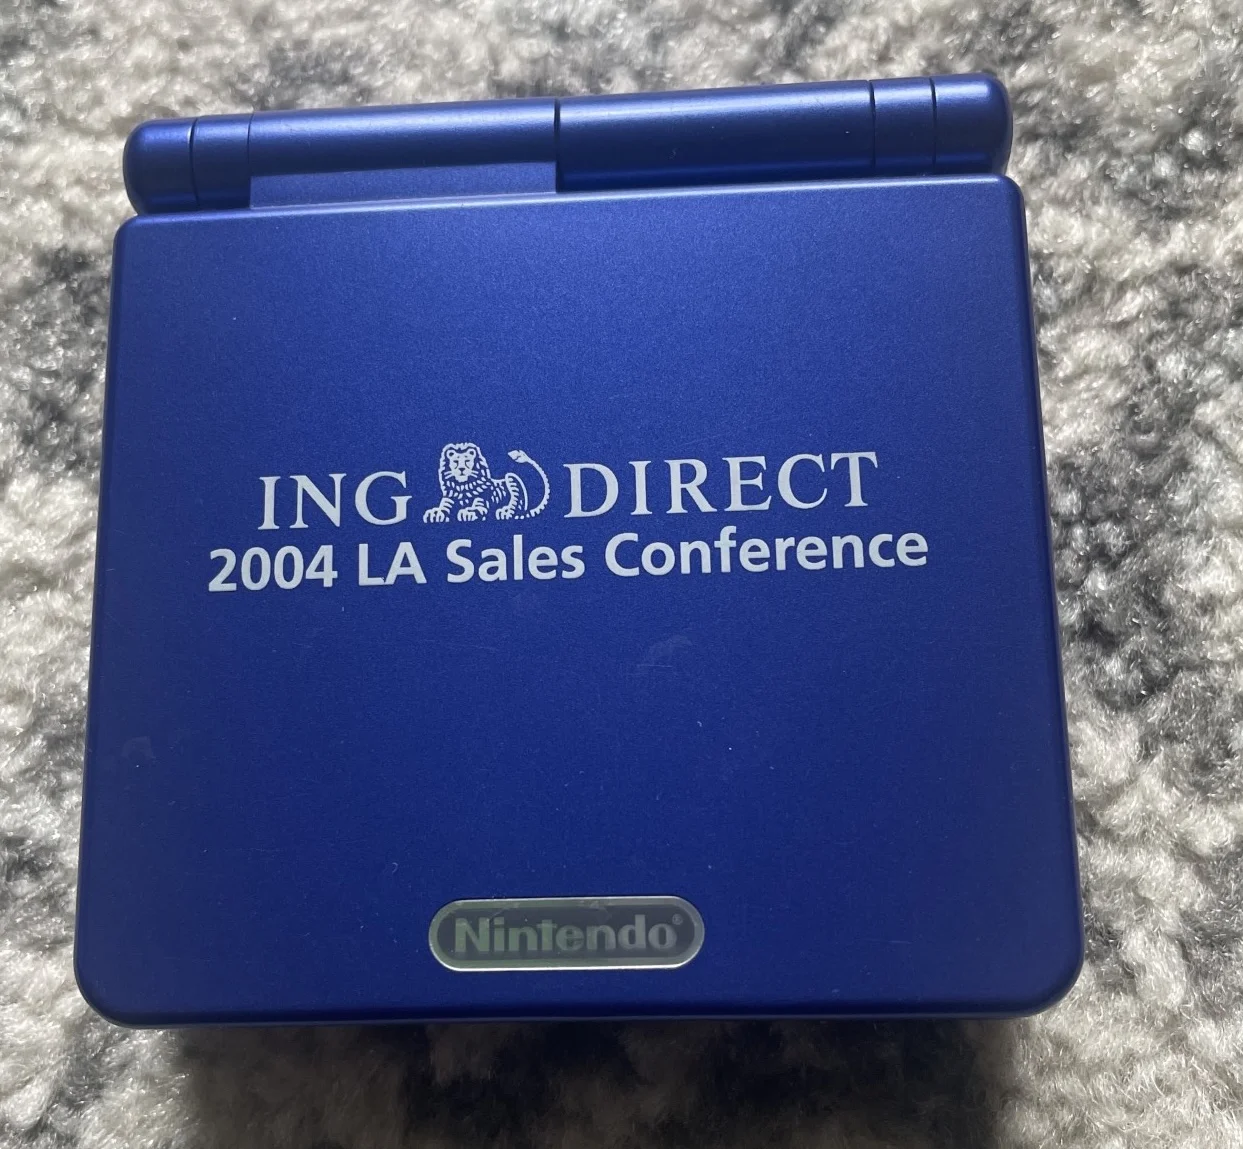  Nintendo Game Boy Advance SP ING Direct 2004 LA Sales Conference Console